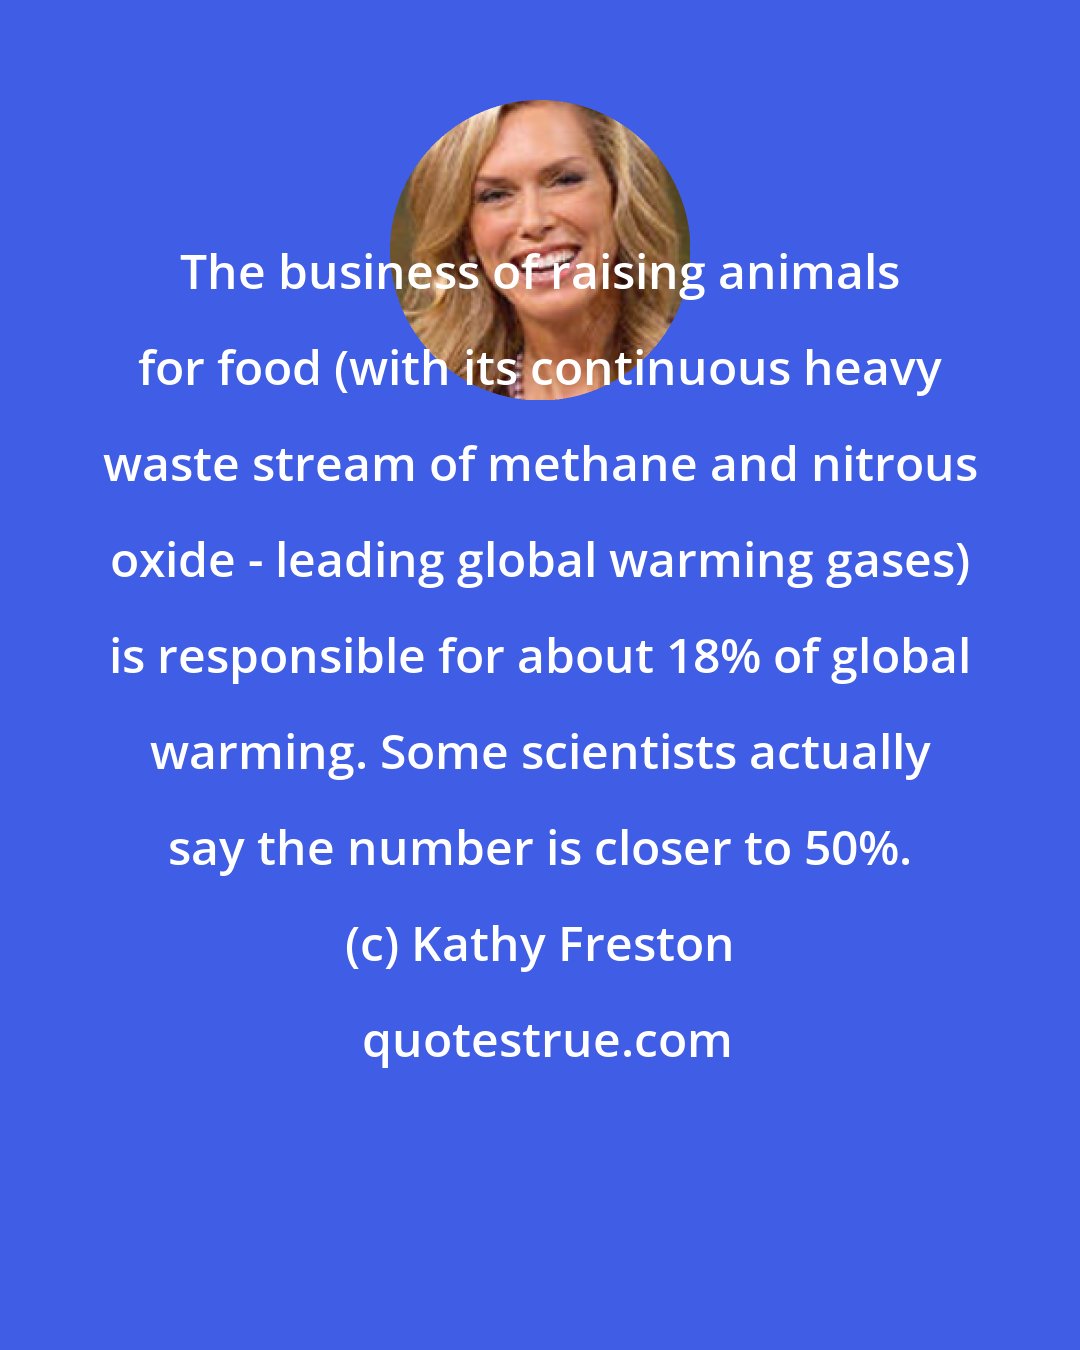 Kathy Freston: The business of raising animals for food (with its continuous heavy waste stream of methane and nitrous oxide - leading global warming gases) is responsible for about 18% of global warming. Some scientists actually say the number is closer to 50%.